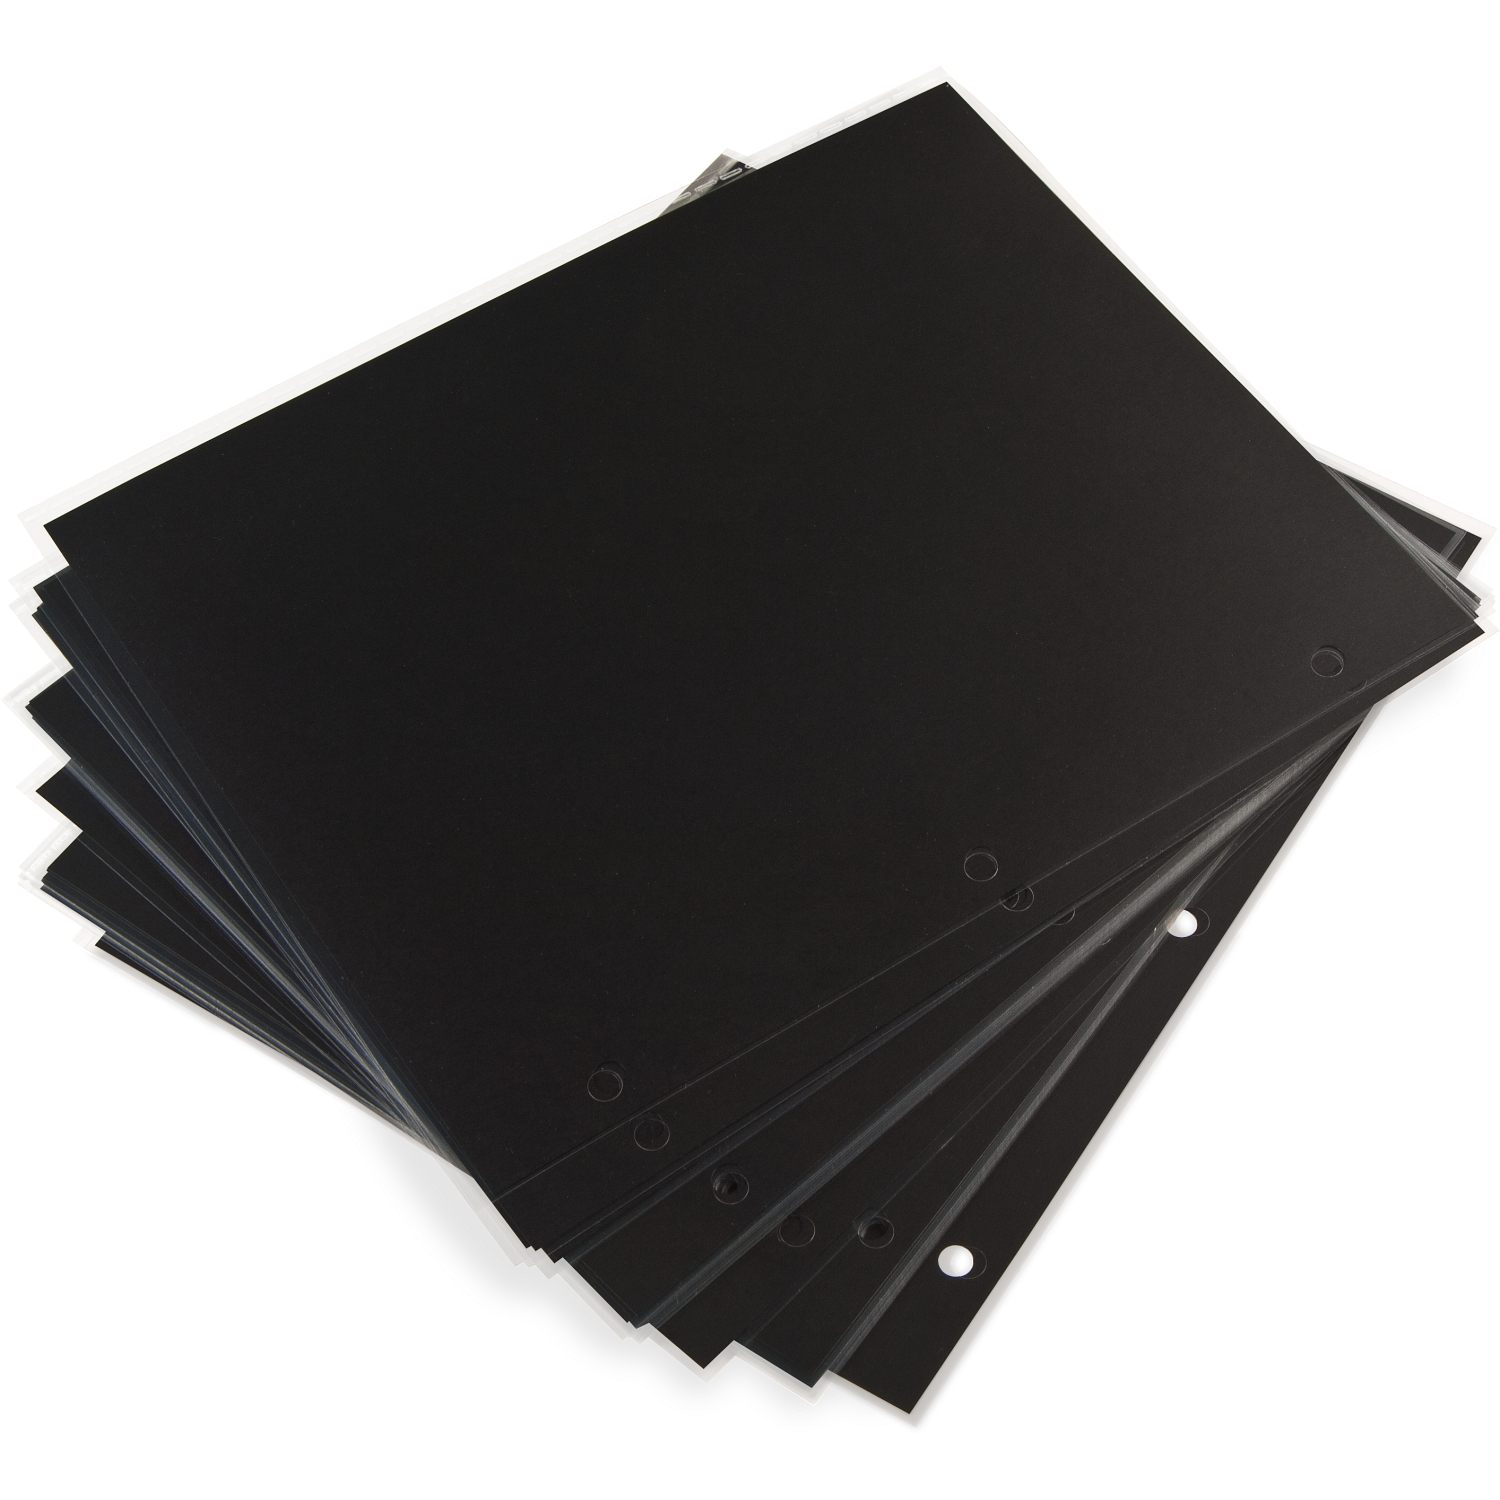 12 x 12 3-Hole Punched Mounting Pages (25-Pack)